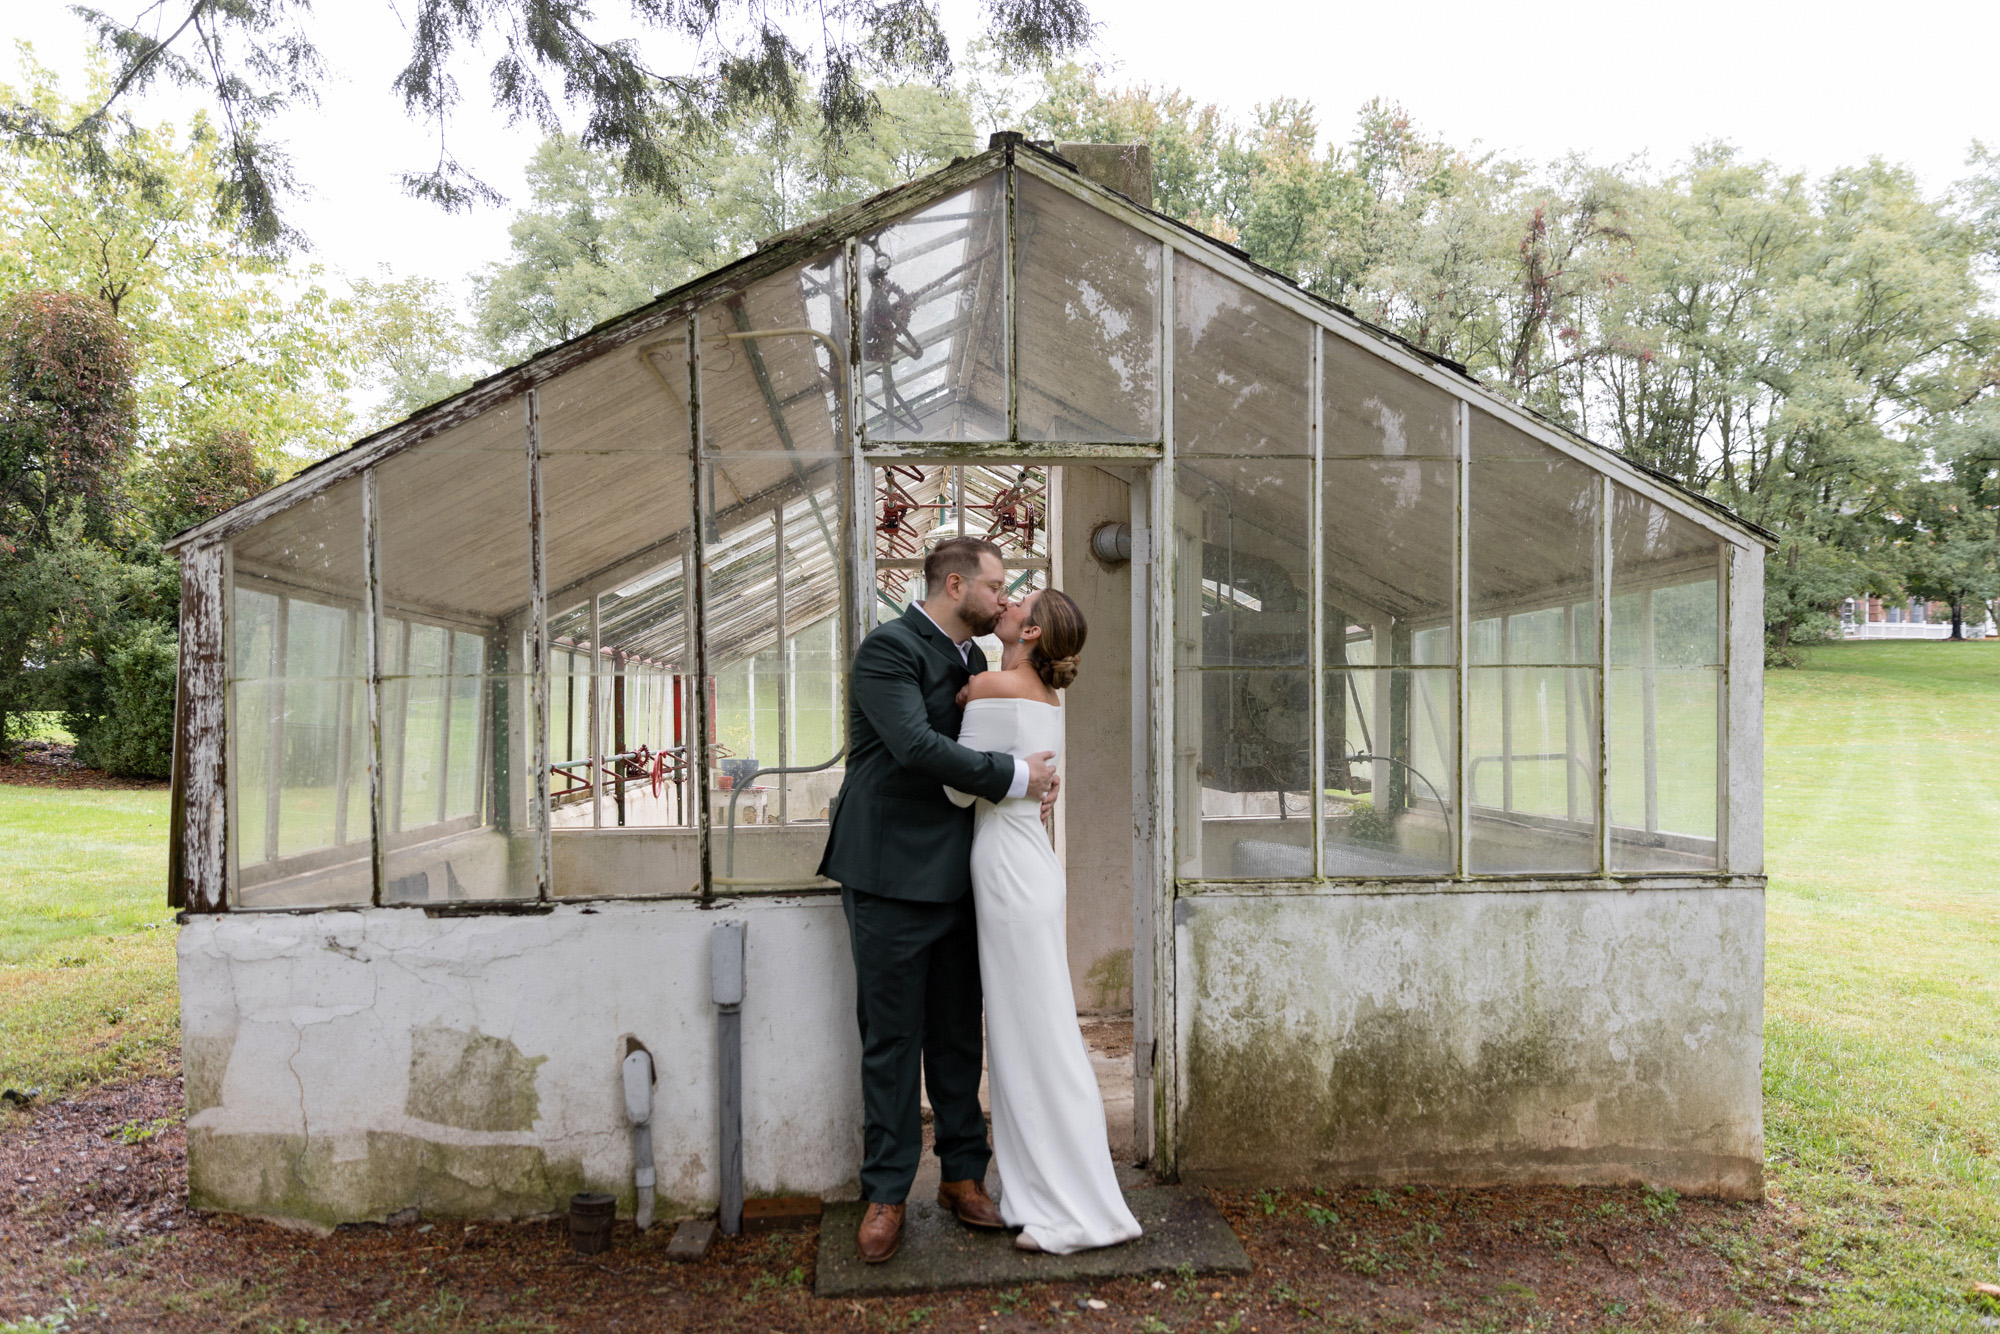 Elegant bride and groom embrace in front of a greenhouse after their wedding ceremony at Chimney Hill Estate Inn in Lambertville, NJ